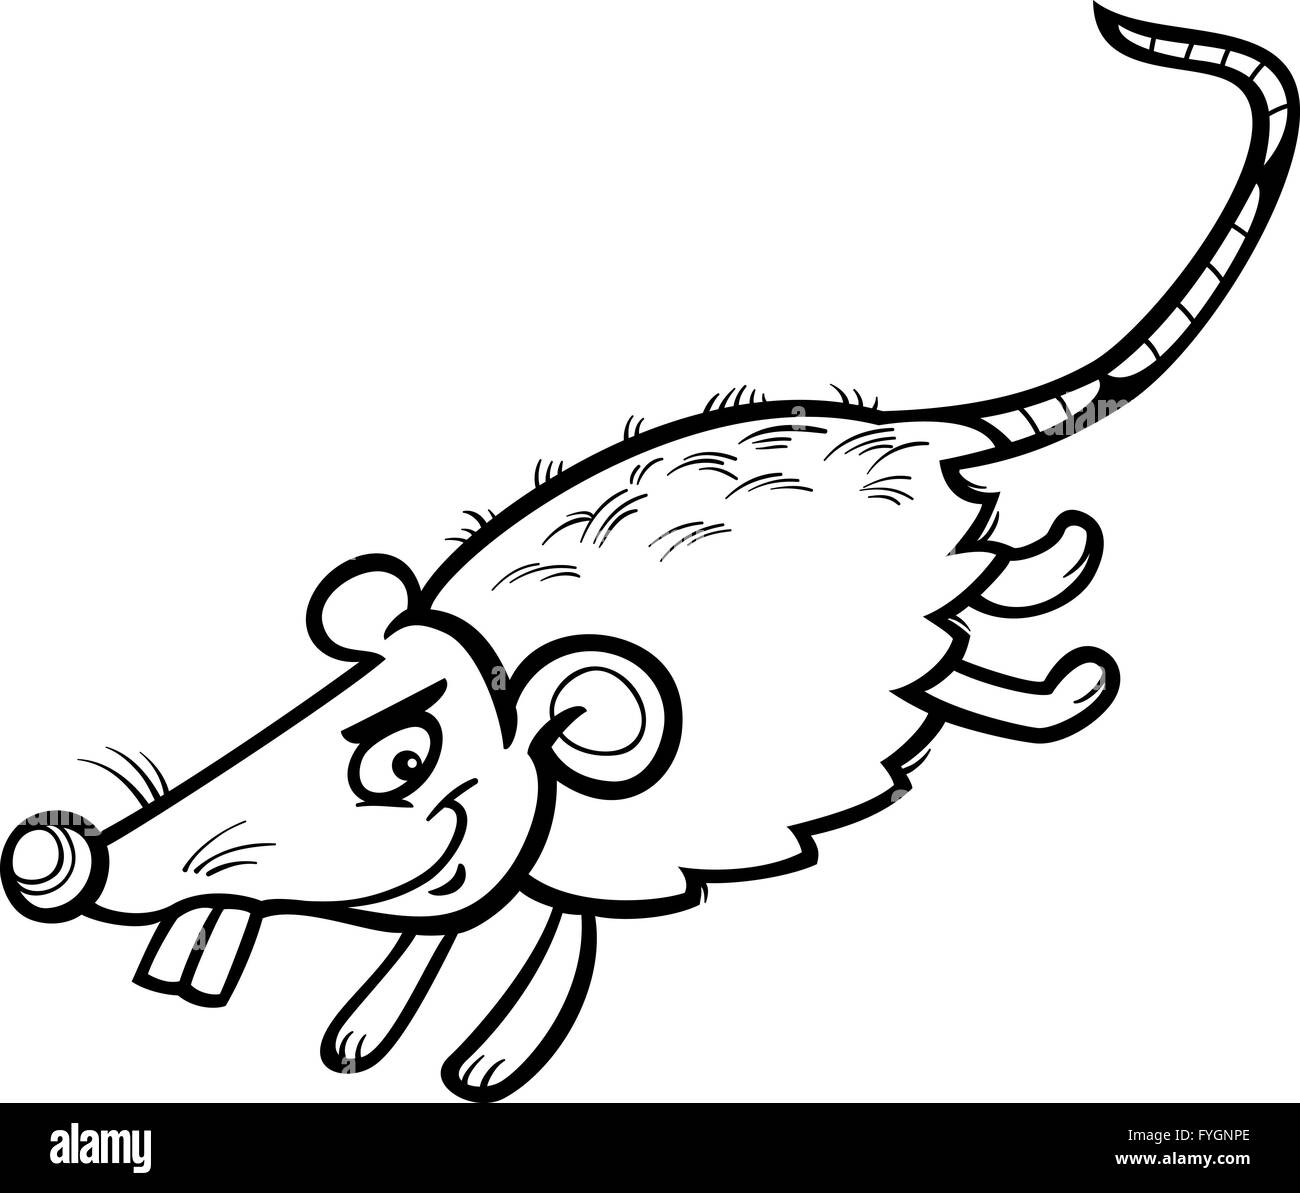 mouse or rat cartoon coloring page Stock Photo